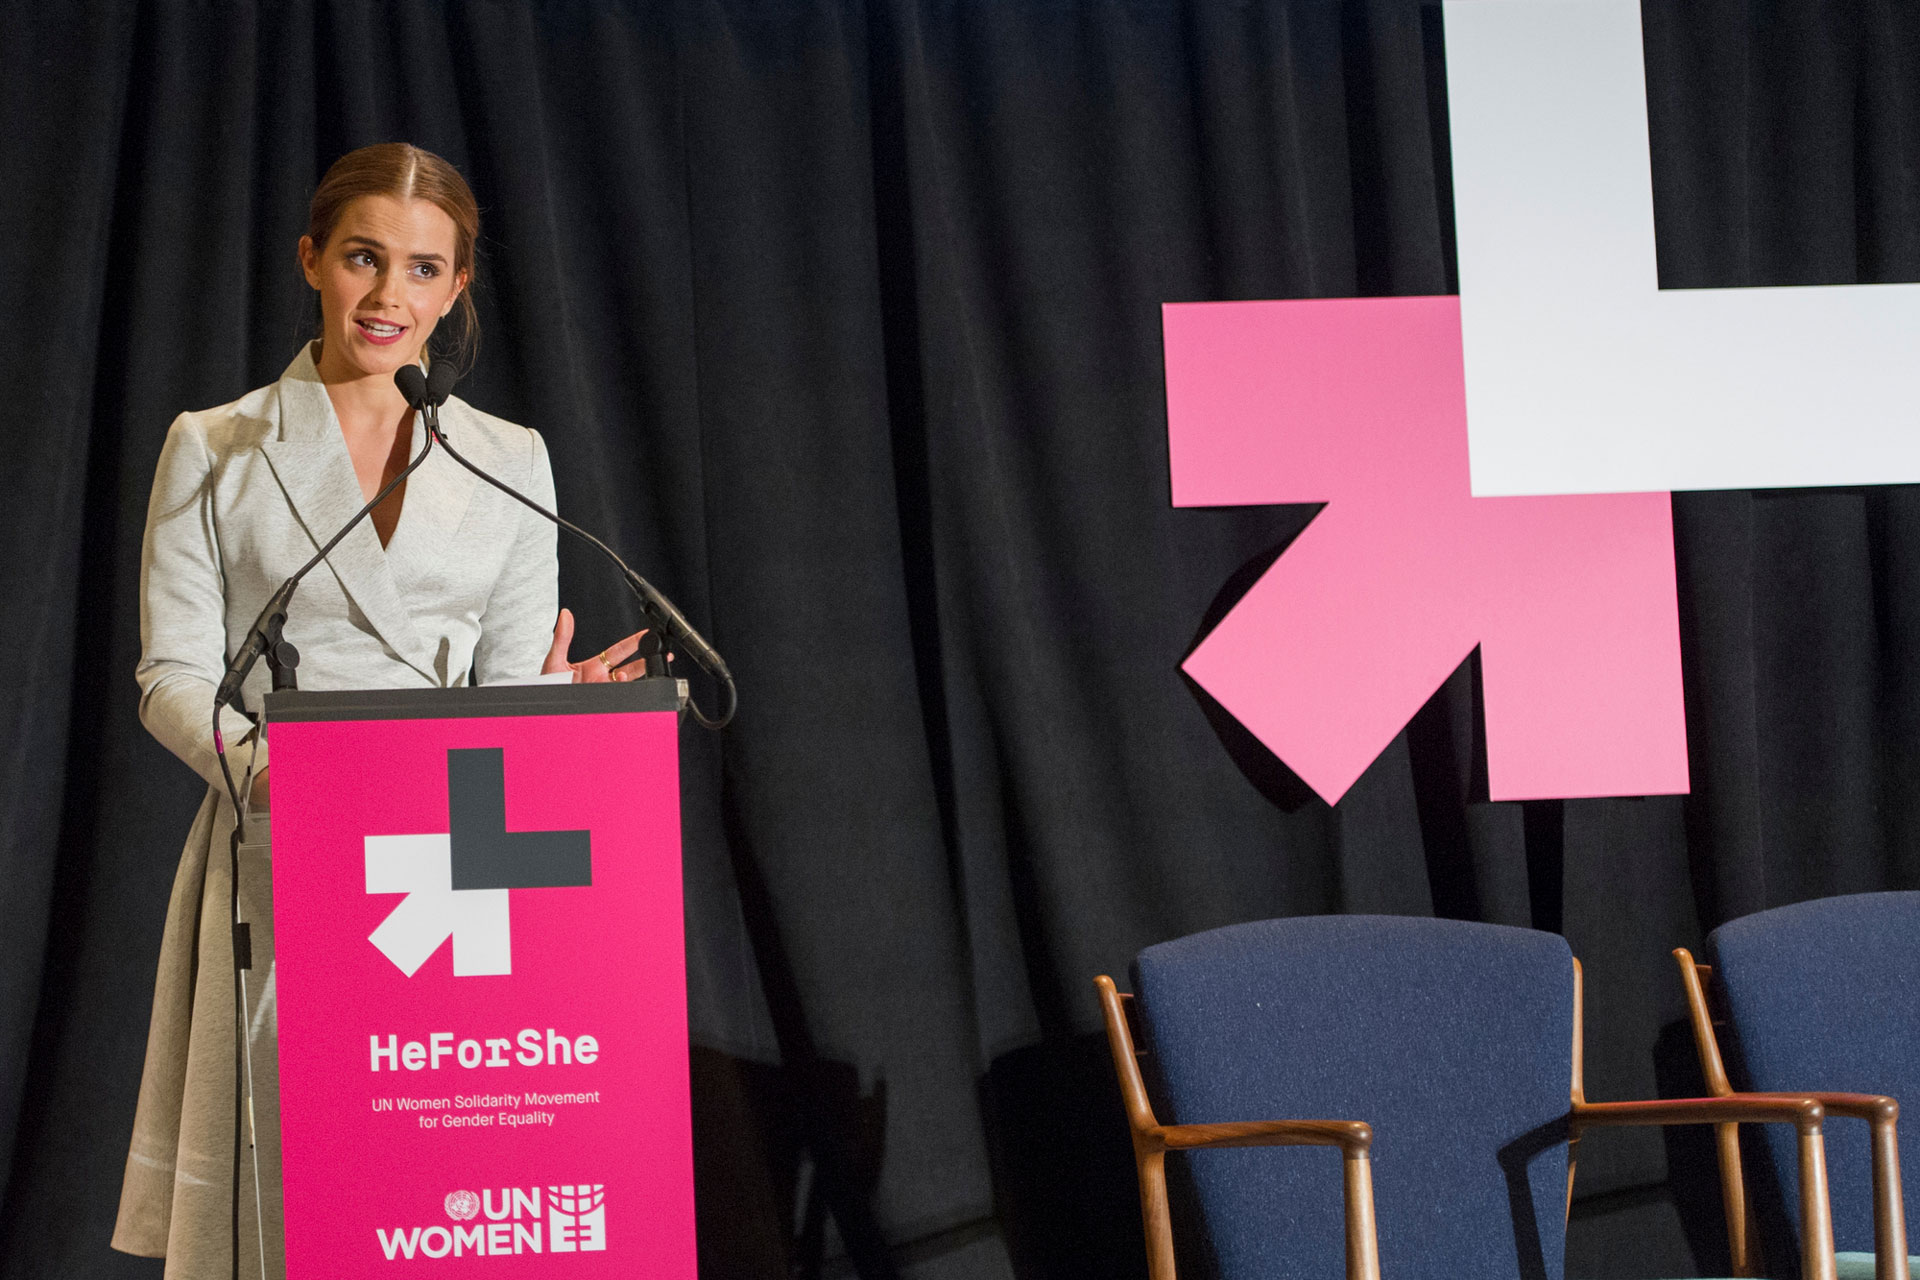 <p><sub>British Actor and UN Women Goodwill Ambassador Emma Watson co-hosts a special event organized by the United Nations Entity for Gender Equality and the Empowerment of Women (UN Women) in support of their HeForShe campaign.</sub></p>